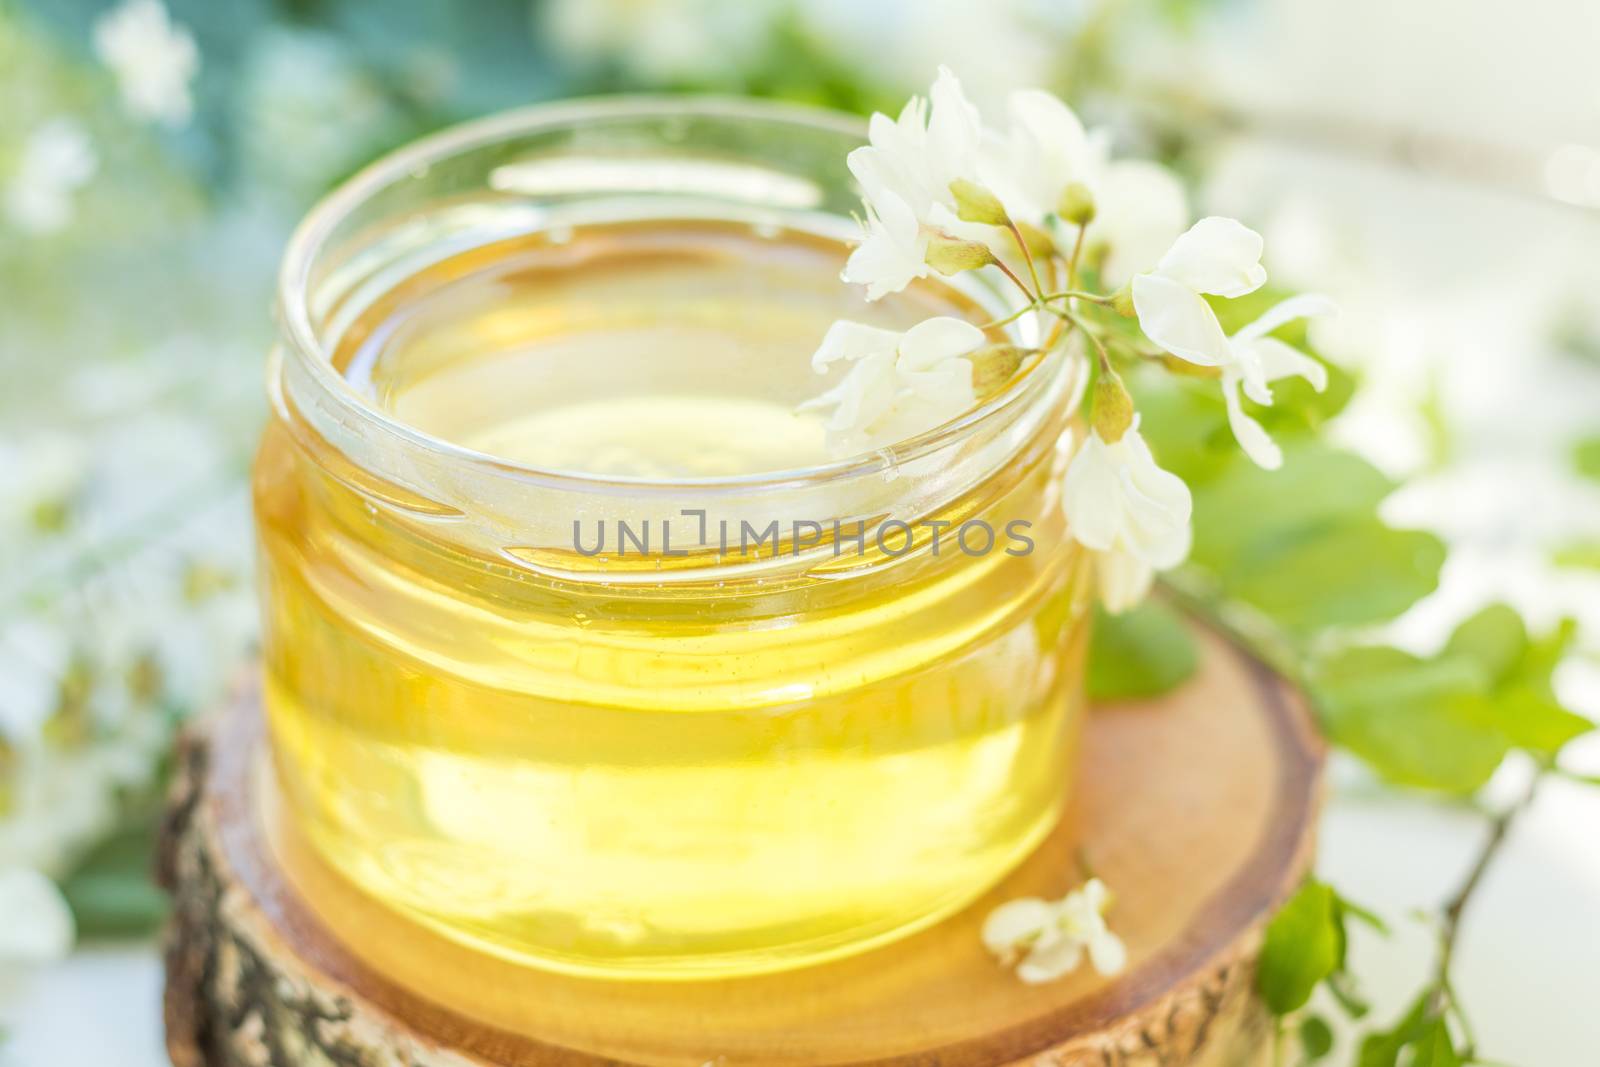 Honey in glass jars with acacia blossoms on windowsill. Shallow depth of field.